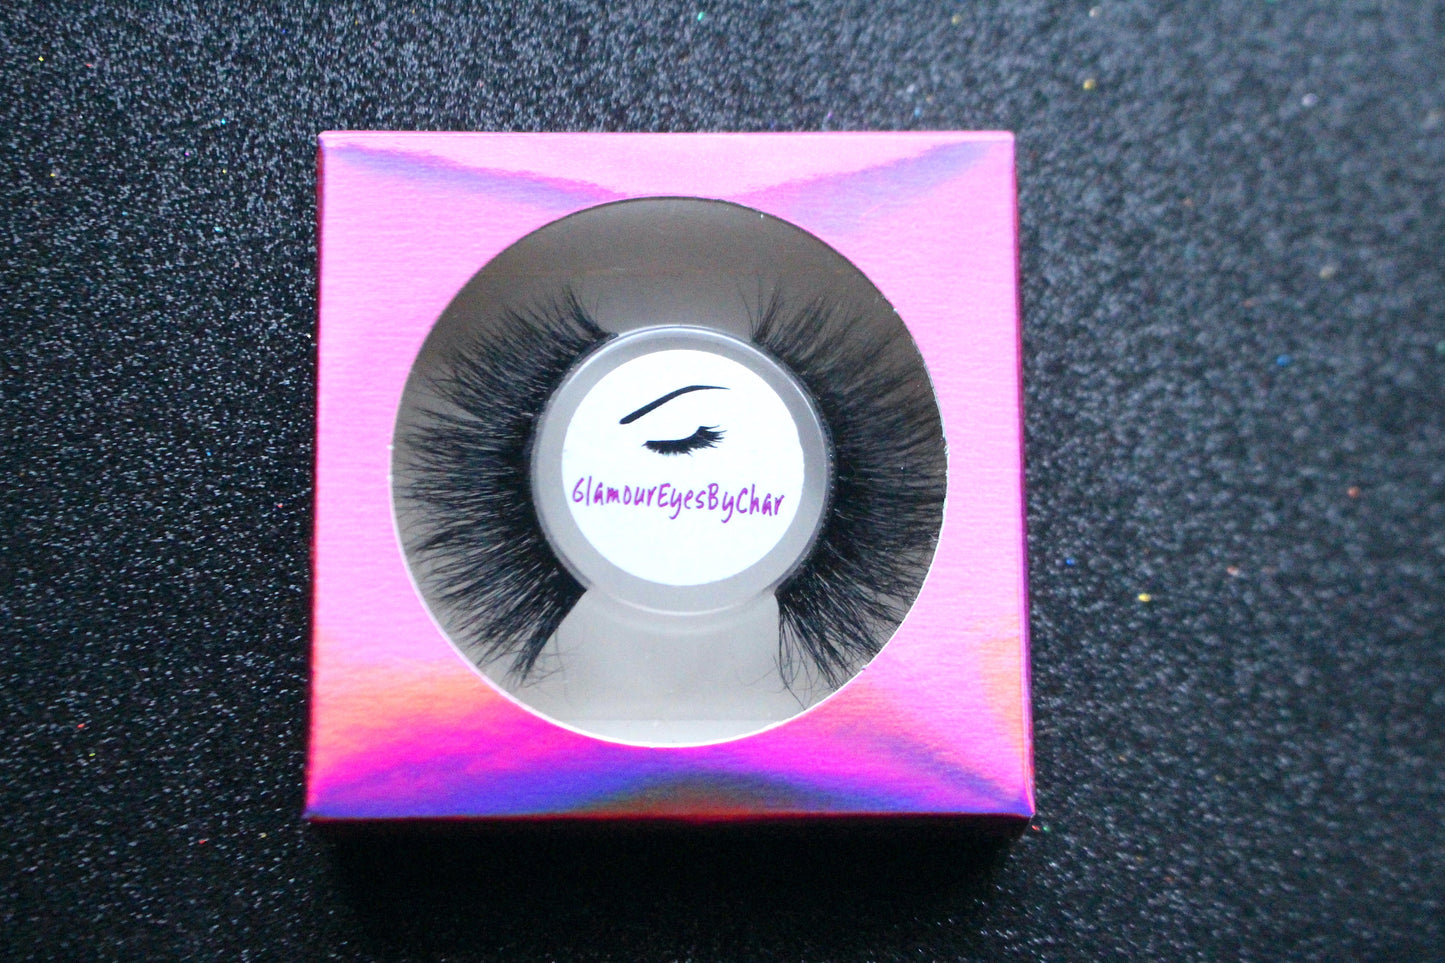 These 3D premium mink lashes are 18-20mm in length. They are soft, lightweight, and very comfortable to wear on the lids. The flexible cotton lash band, makes the application process a breeze. Jakki 2.0 lashes are suitable for everyday use, with a soft natural look. They are perfect for a beginner lash wearer, and you can wear this reusable style up to 25 times if handled with care. Lashes come with a cute bag, and a mascara wand so that you can take care of these beauties. 